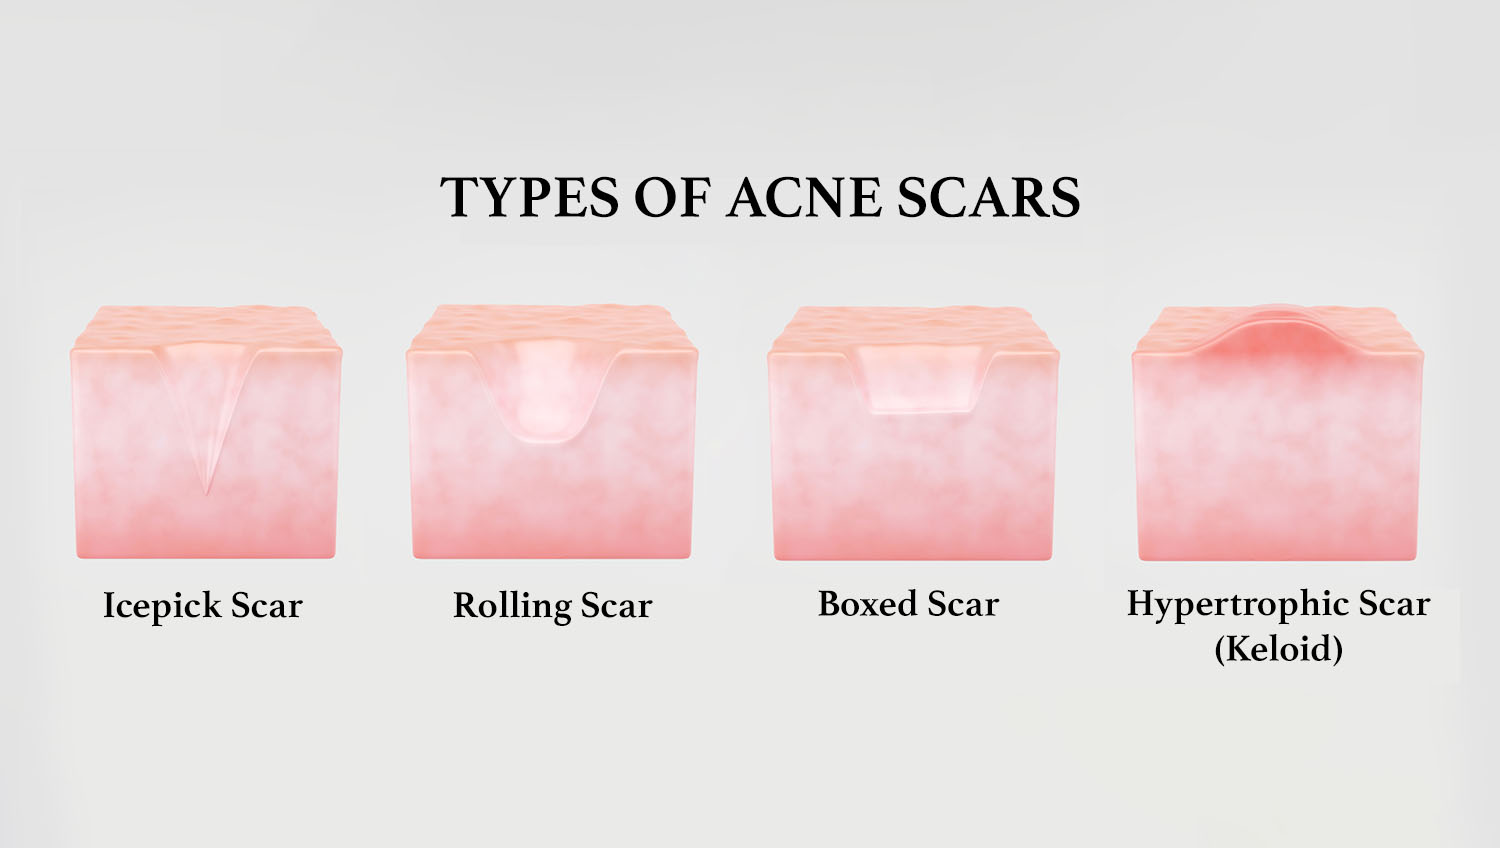 Type of acne scar